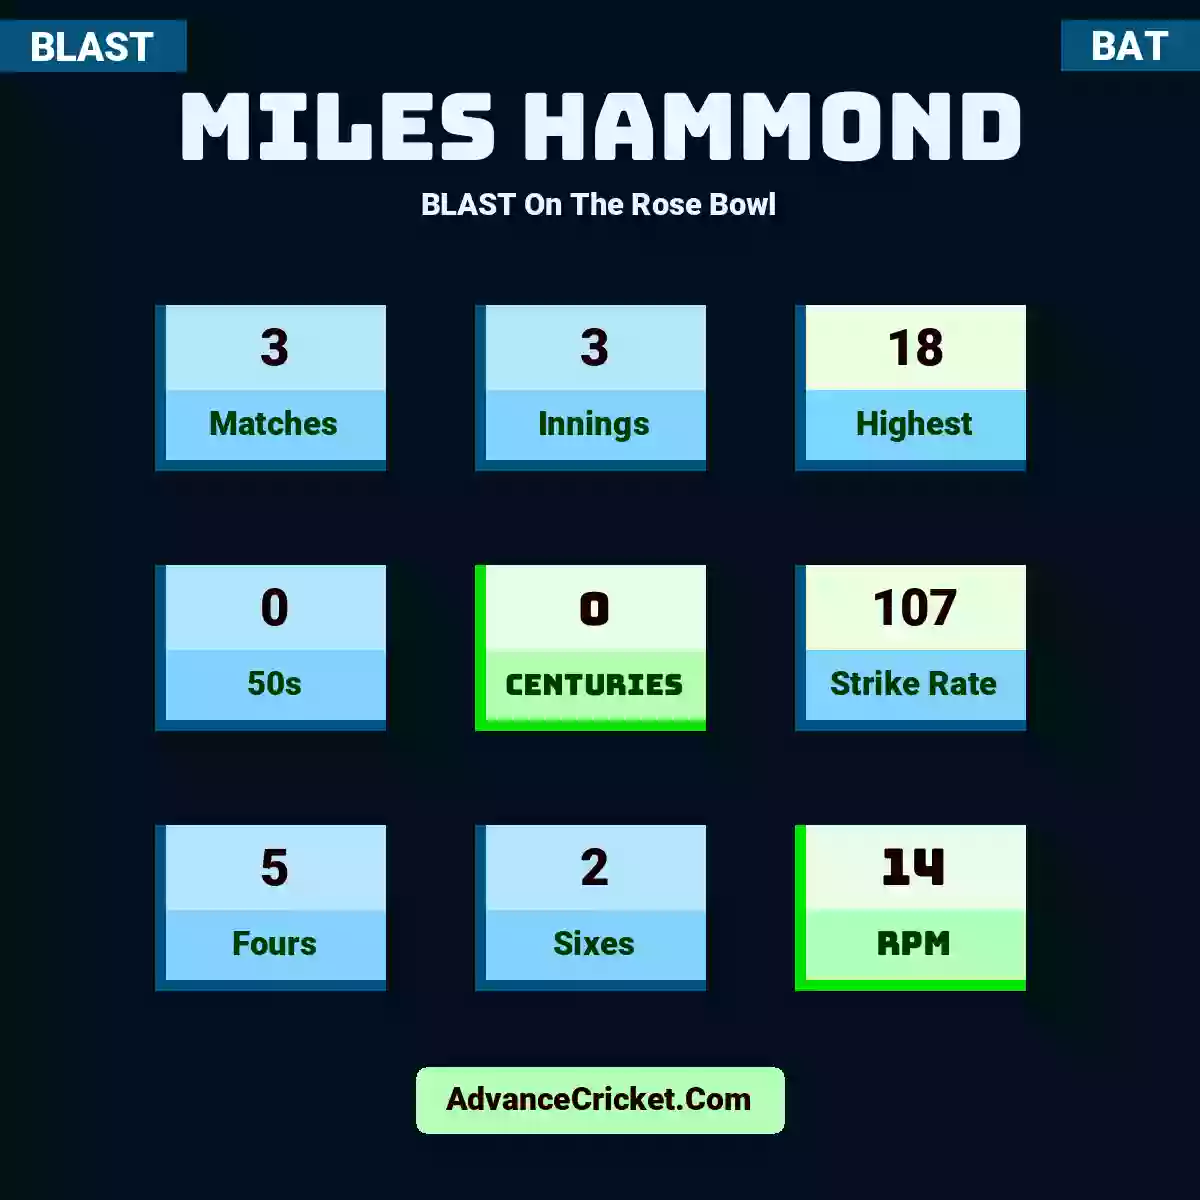 Miles Hammond BLAST  On The Rose Bowl, Miles Hammond played 3 matches, scored 18 runs as highest, 0 half-centuries, and 0 centuries, with a strike rate of 107. M.Hammond hit 5 fours and 2 sixes, with an RPM of 14.